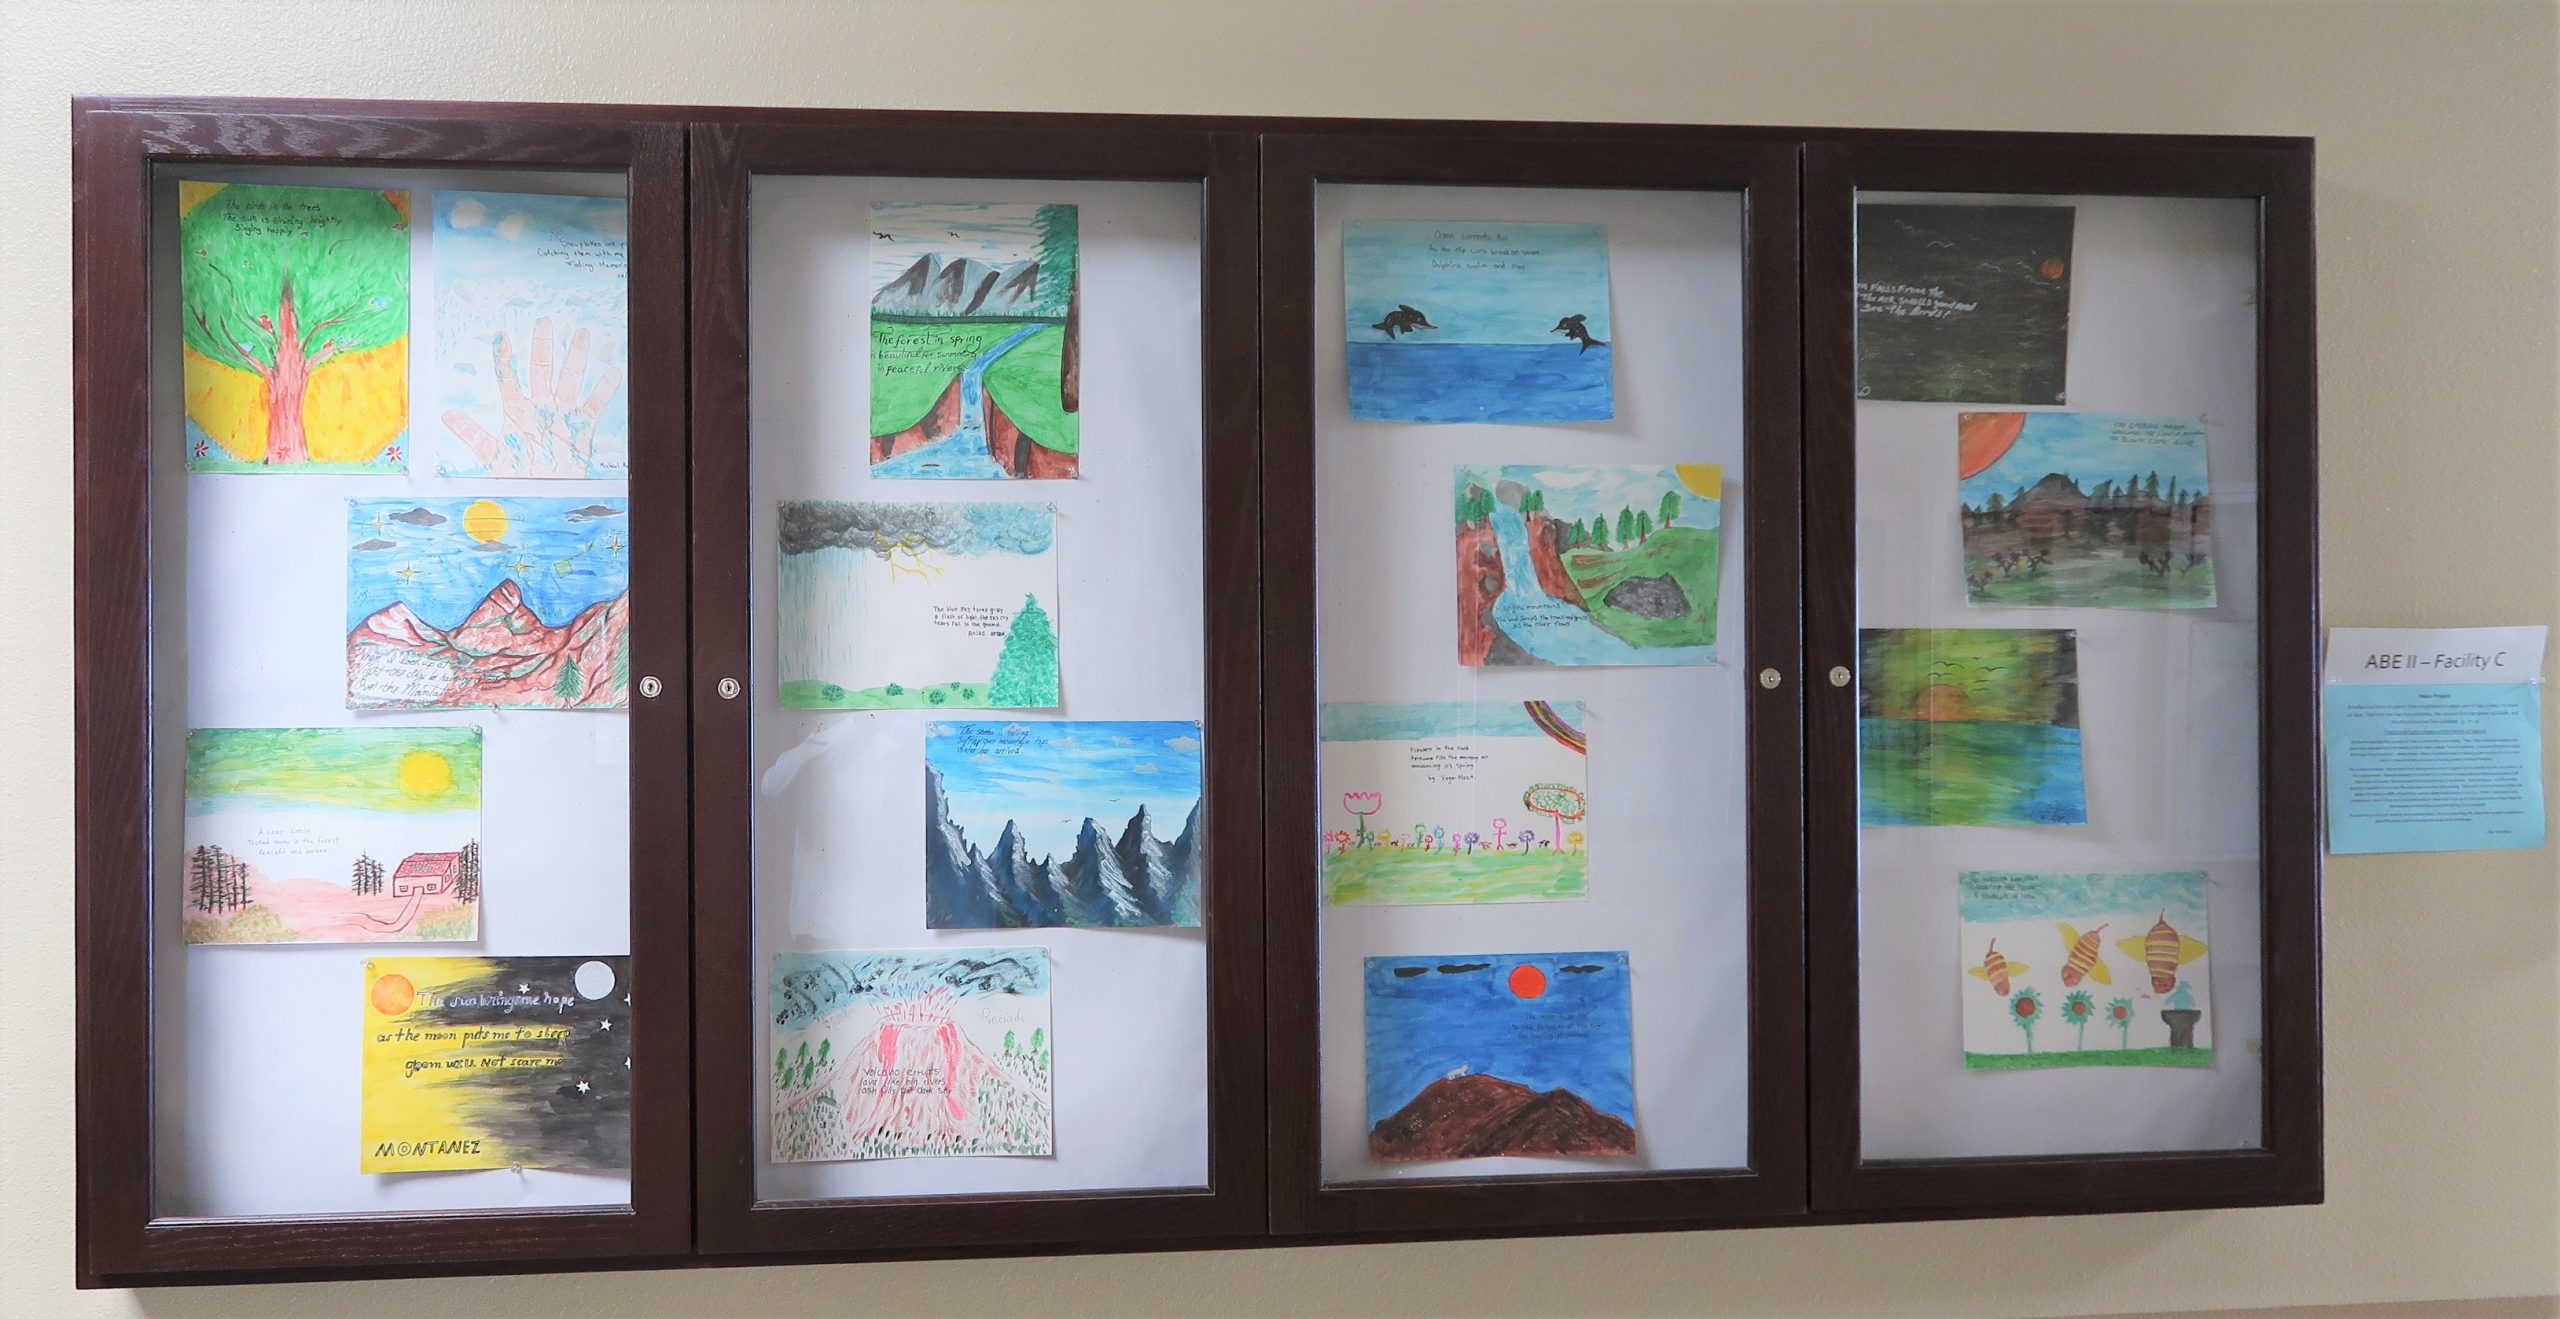 Haiku and watercolor paintings in a display case at Avenal prison.